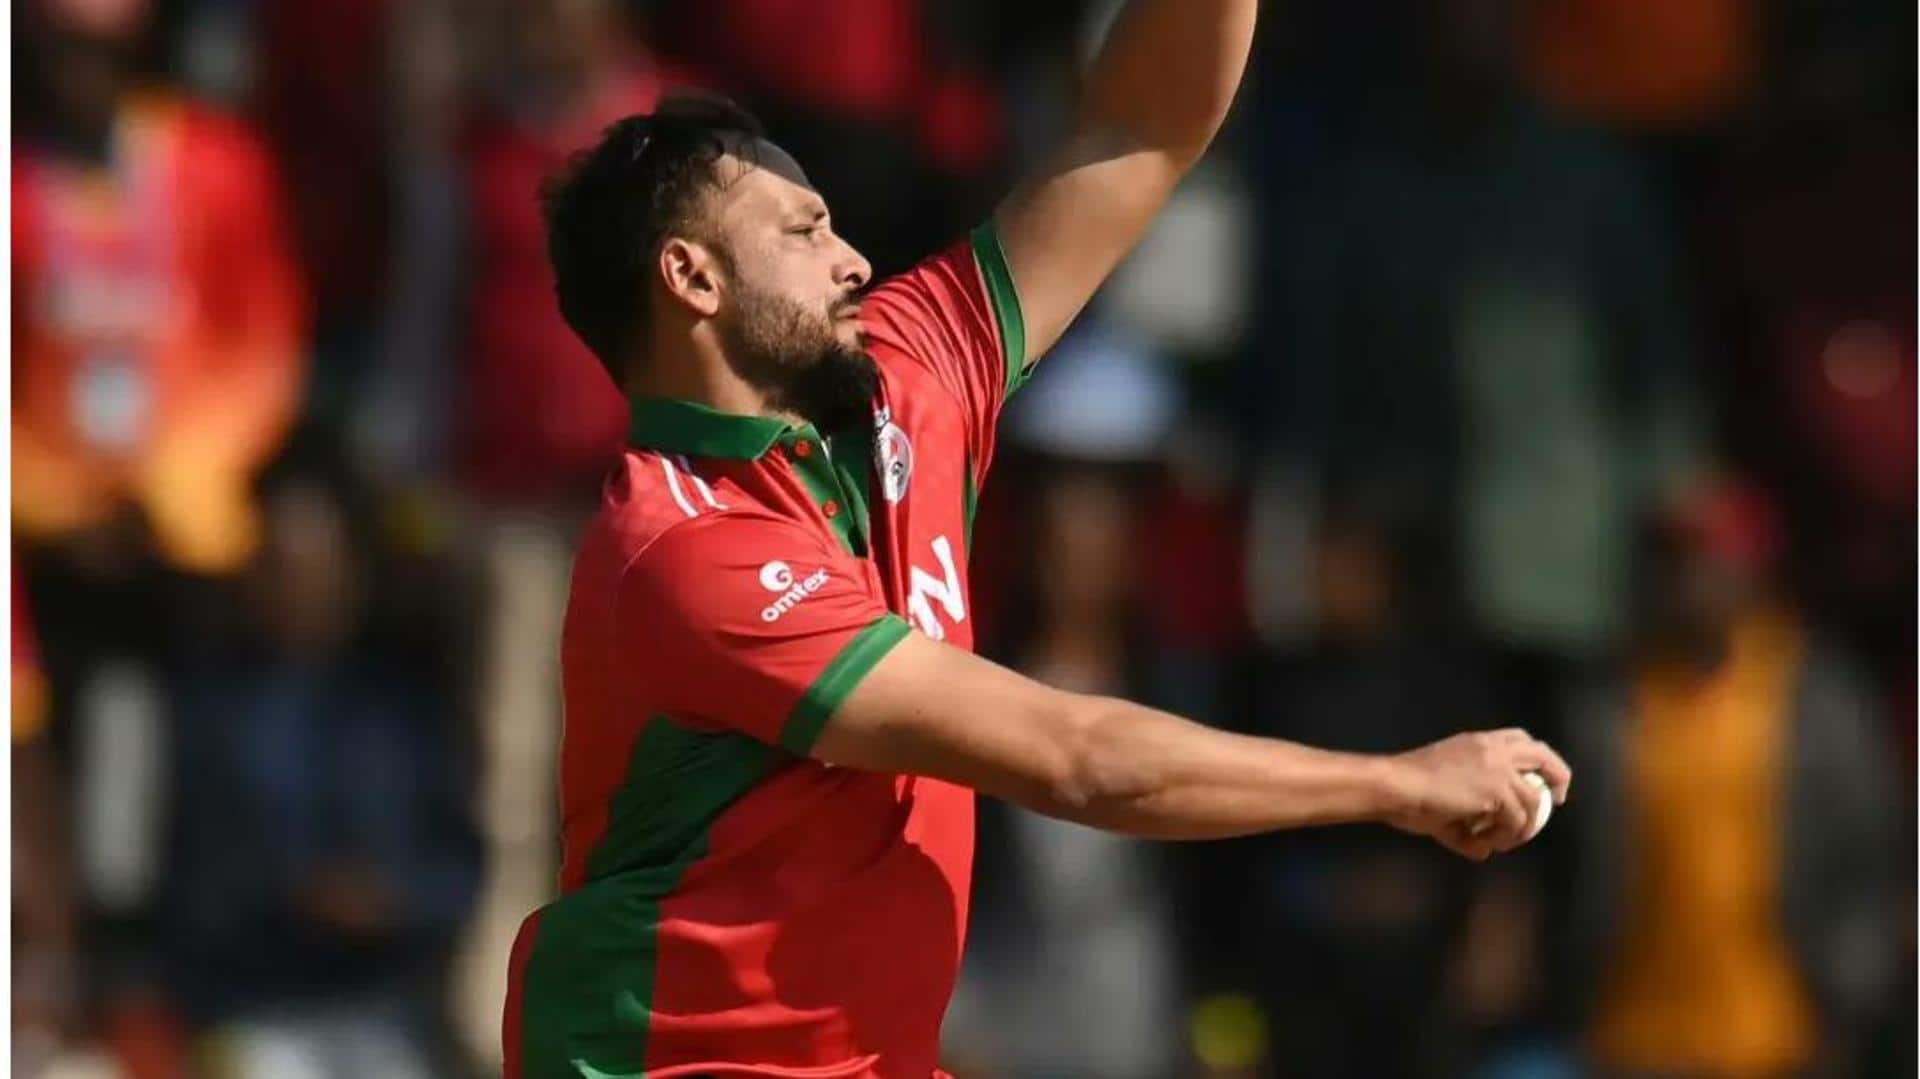 CWC Qualifiers: Oman's Fayyaz Butt records his career-best ODI figures